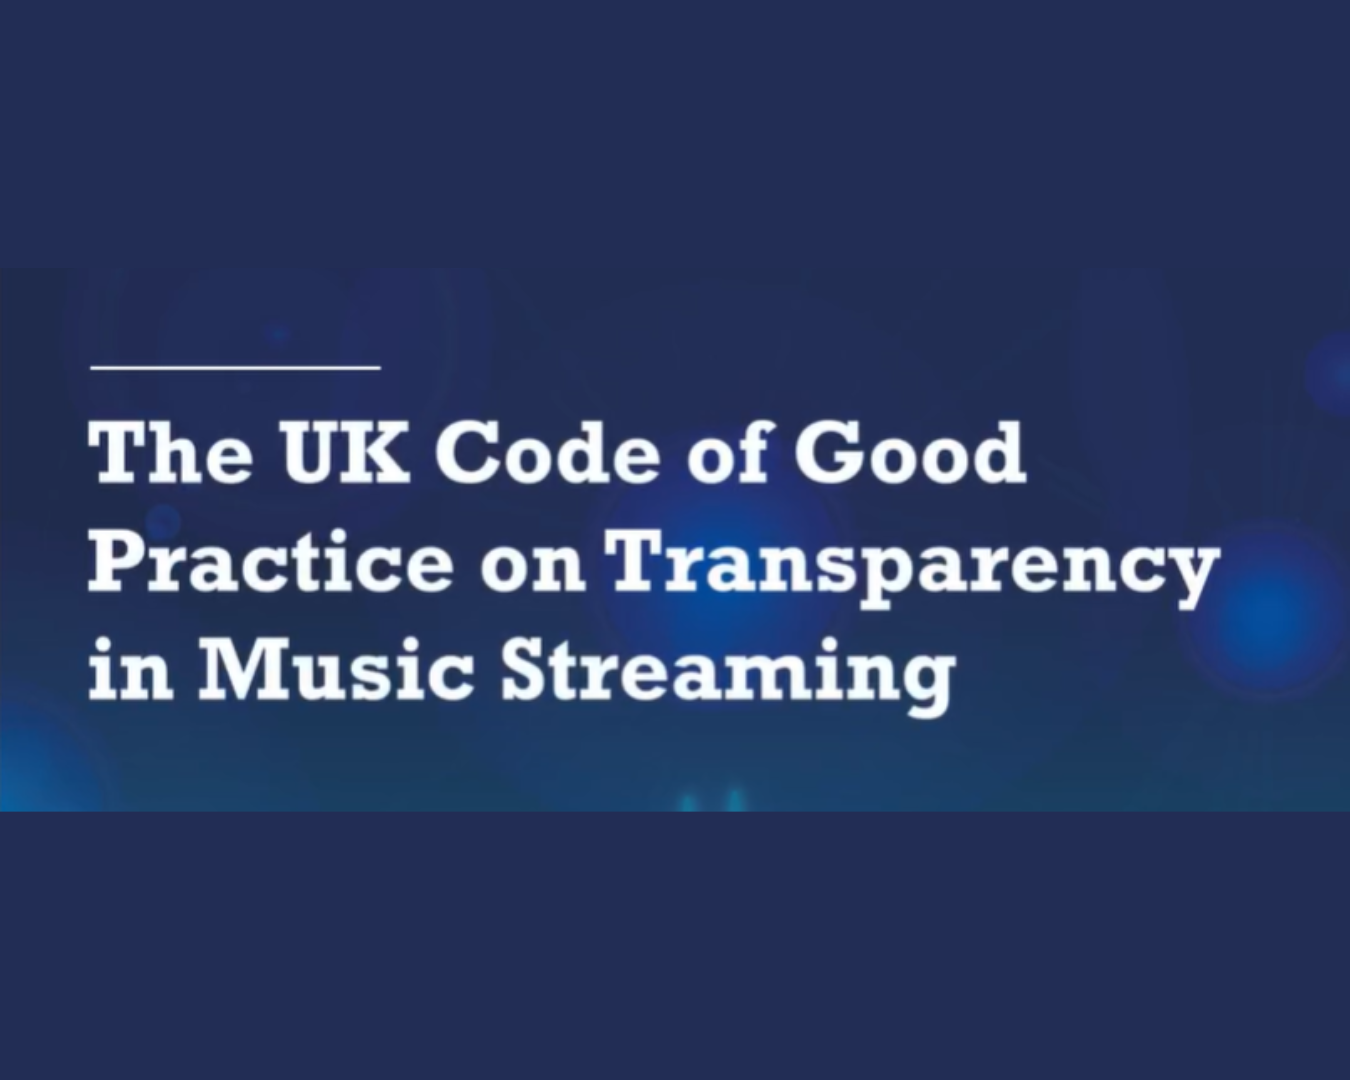 UK Voluntary Code of Good Practice on Transparency in Music Streaming